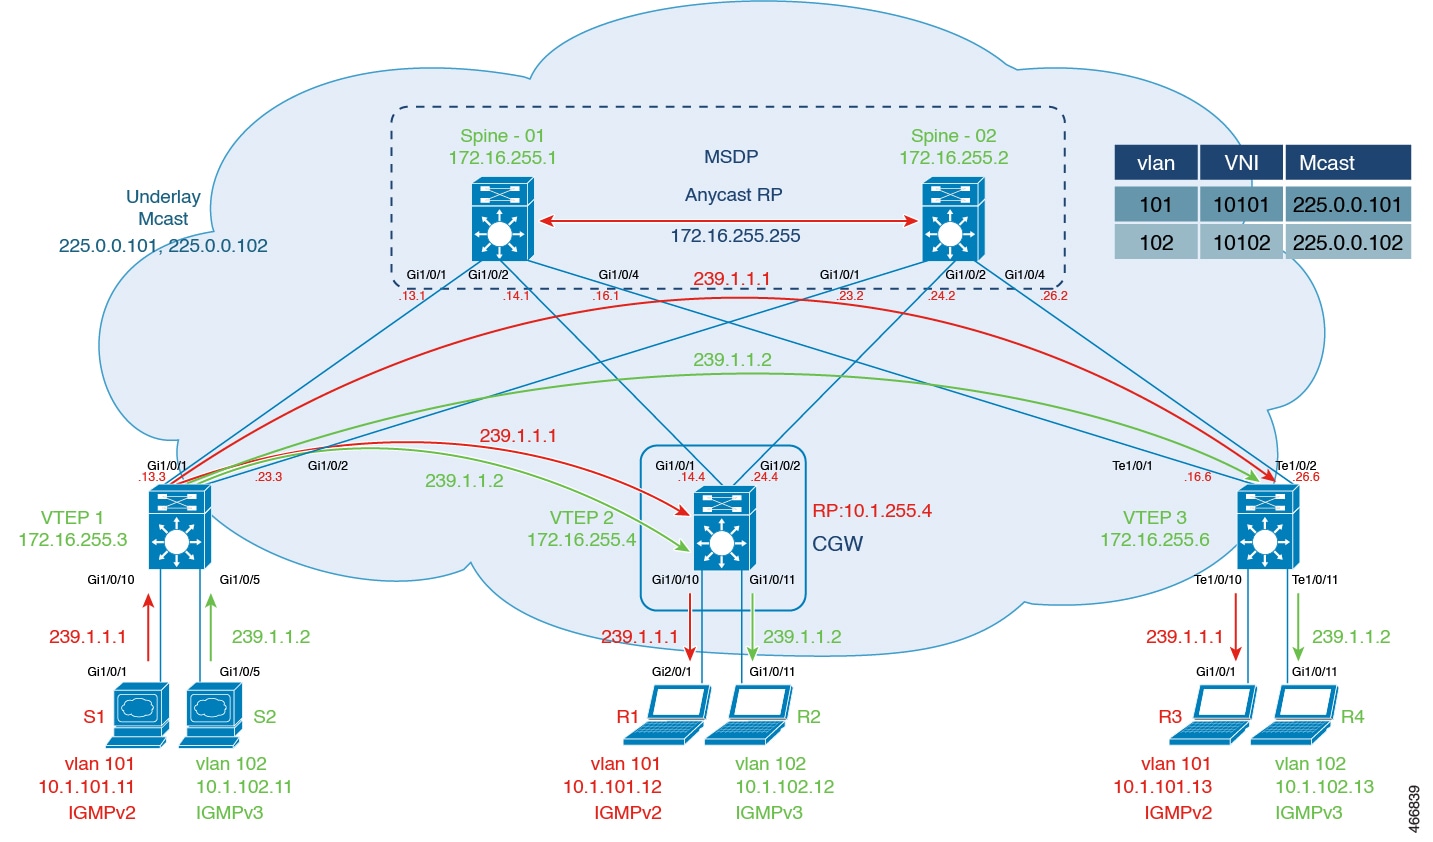 BGP EVPN VXLAN Fabric Topology to show multicast replication in the Underlay